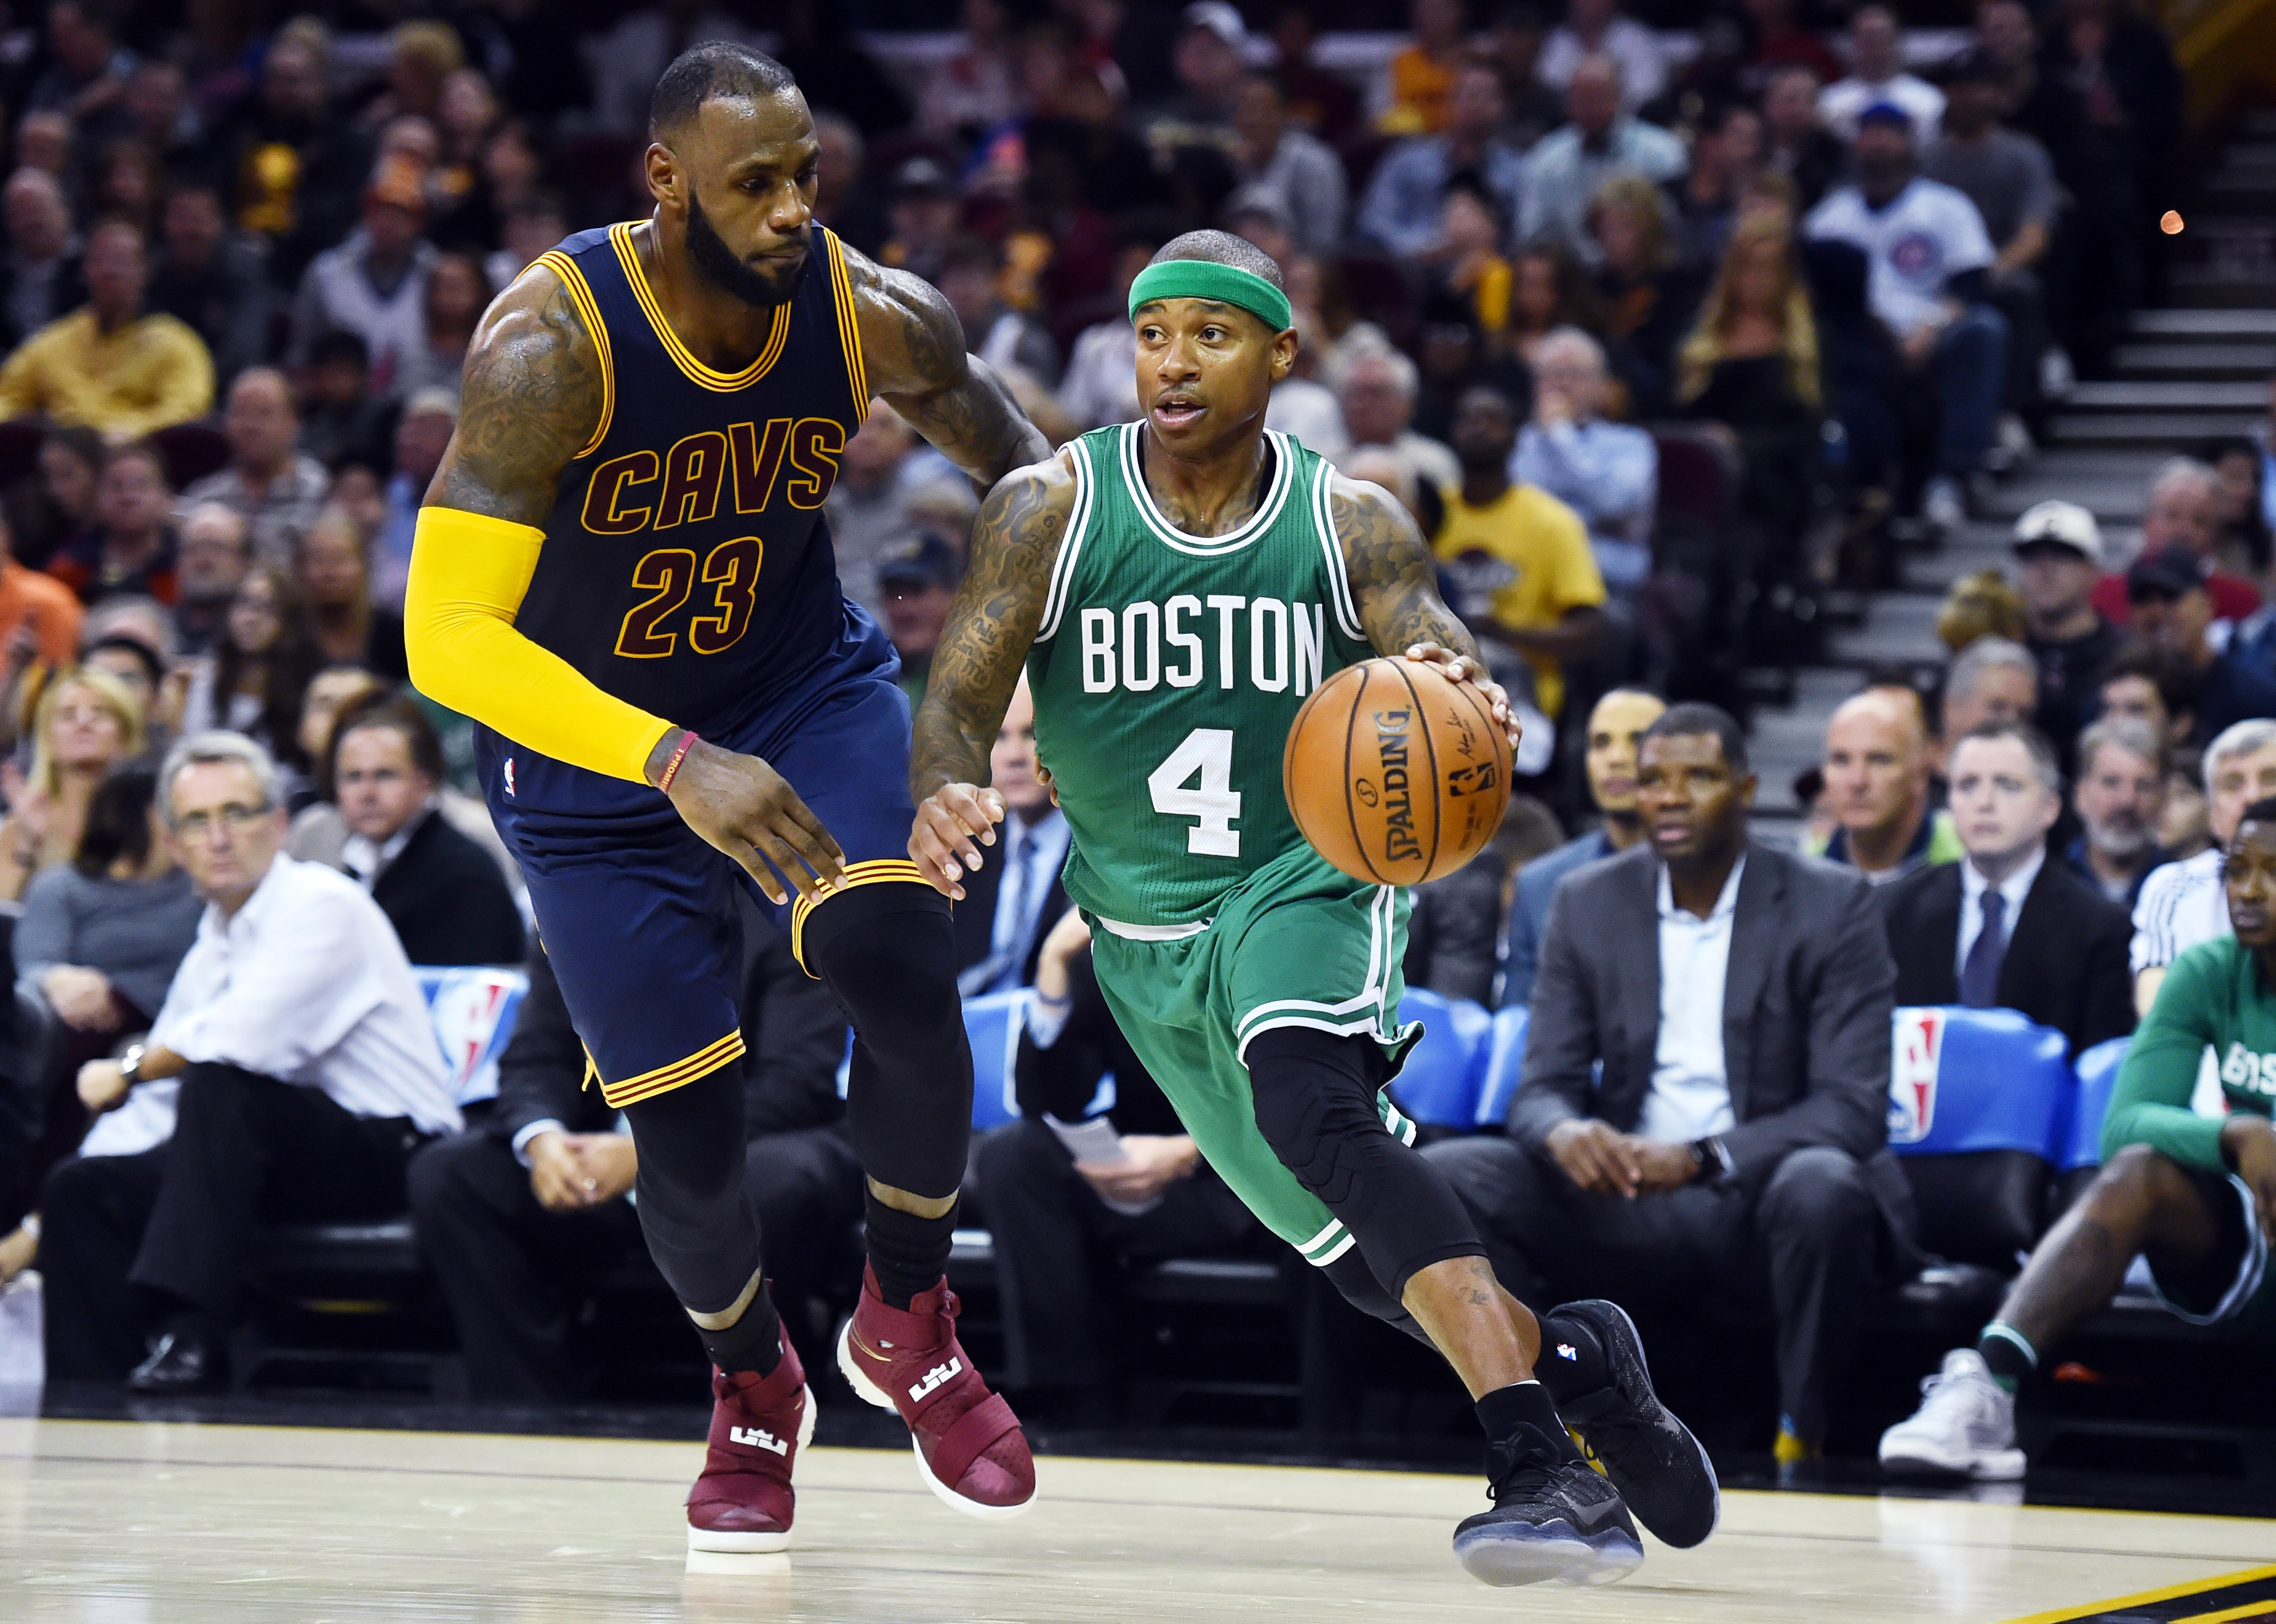 Isaiah Thomas was worried about handshakes after joining LeBron James: All  the other stuff, I'll figure that out, Basketball Network